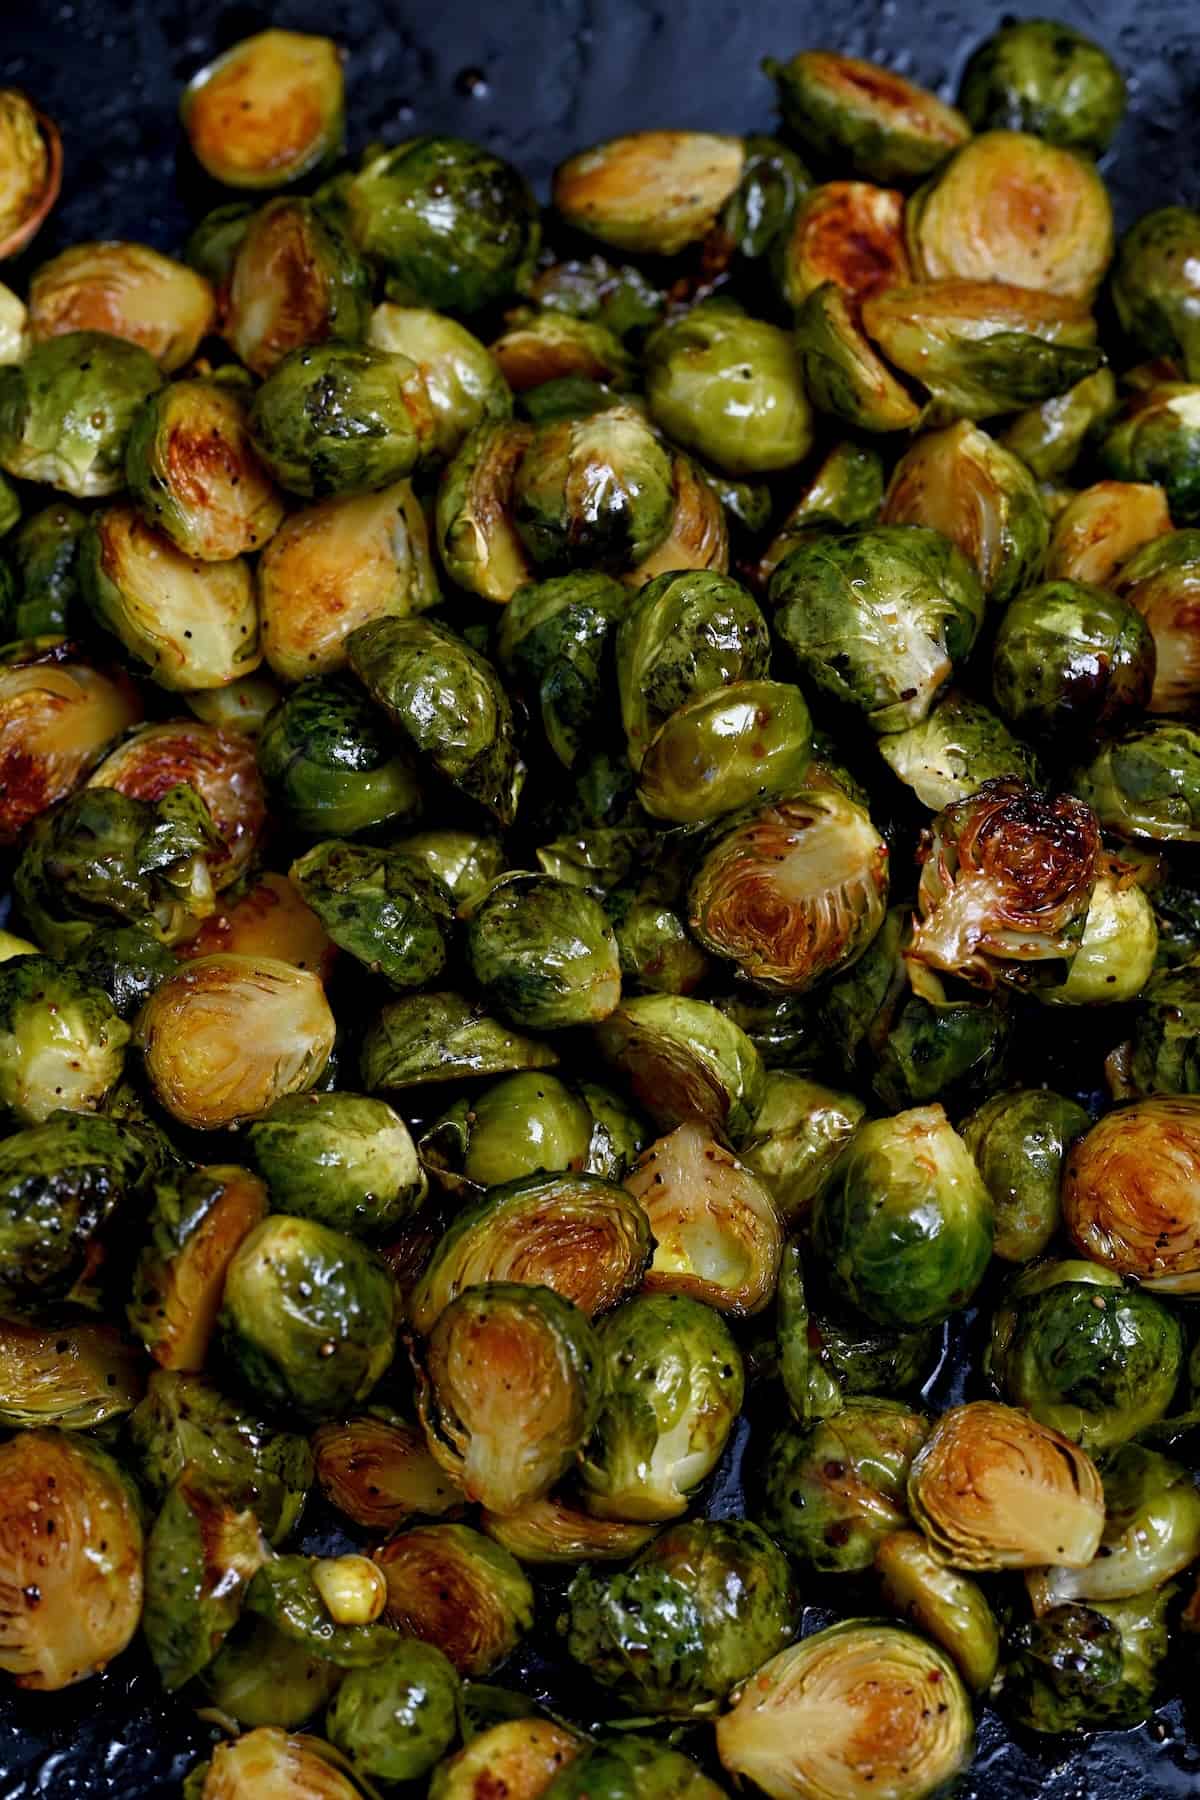 Roasted Brussel sprouts on a baking tray